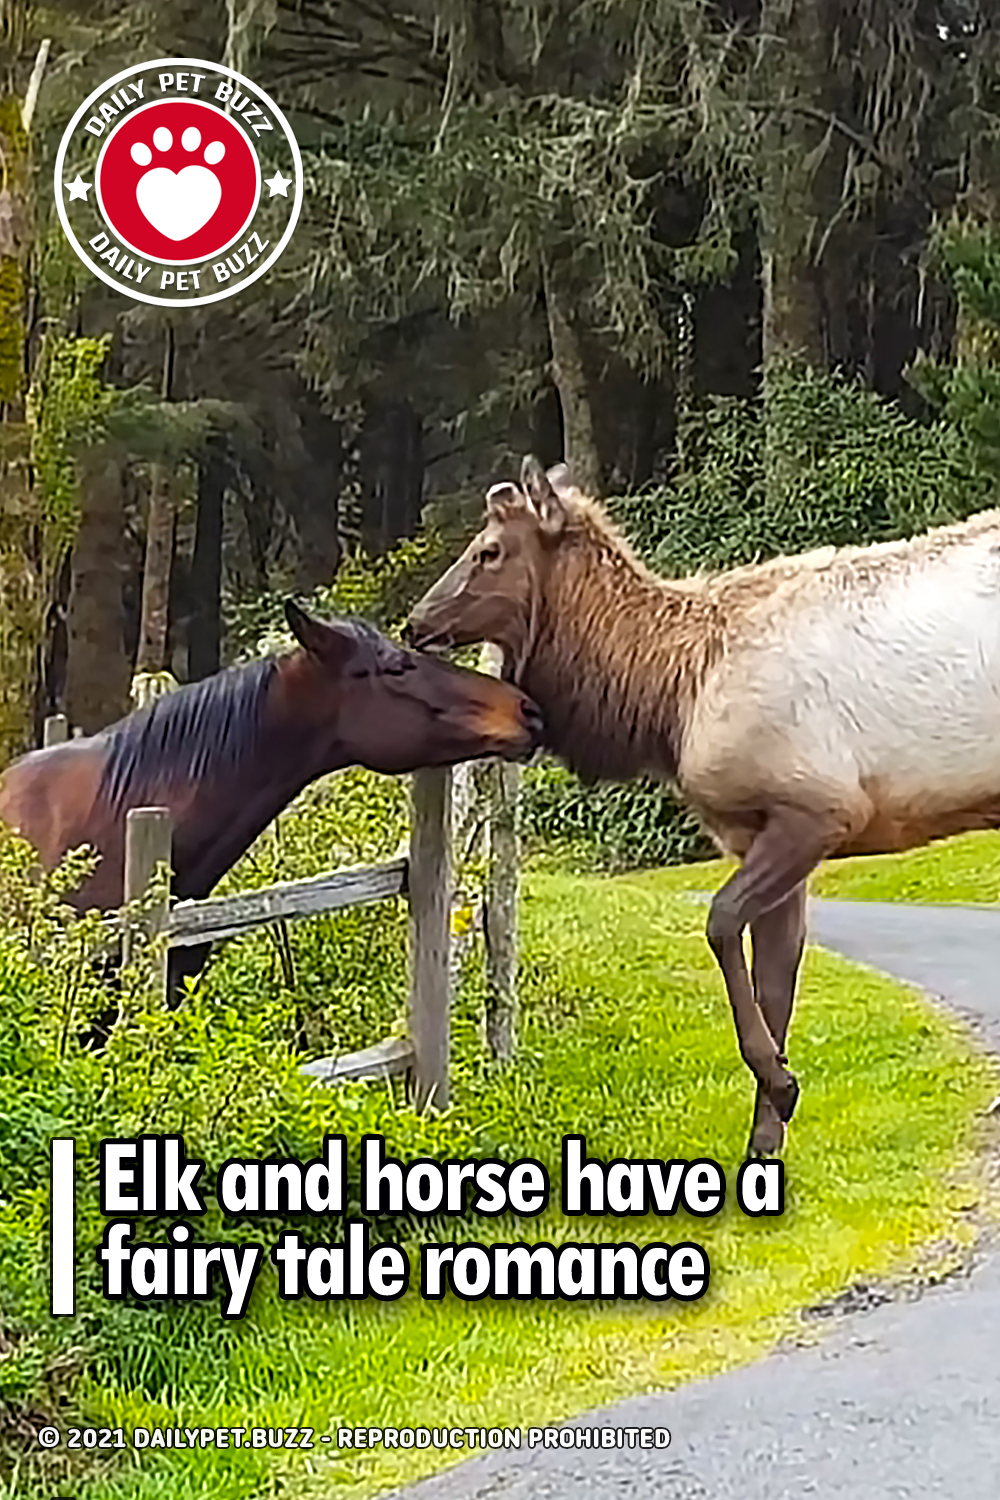 Elk and horse have a fairy tale romance